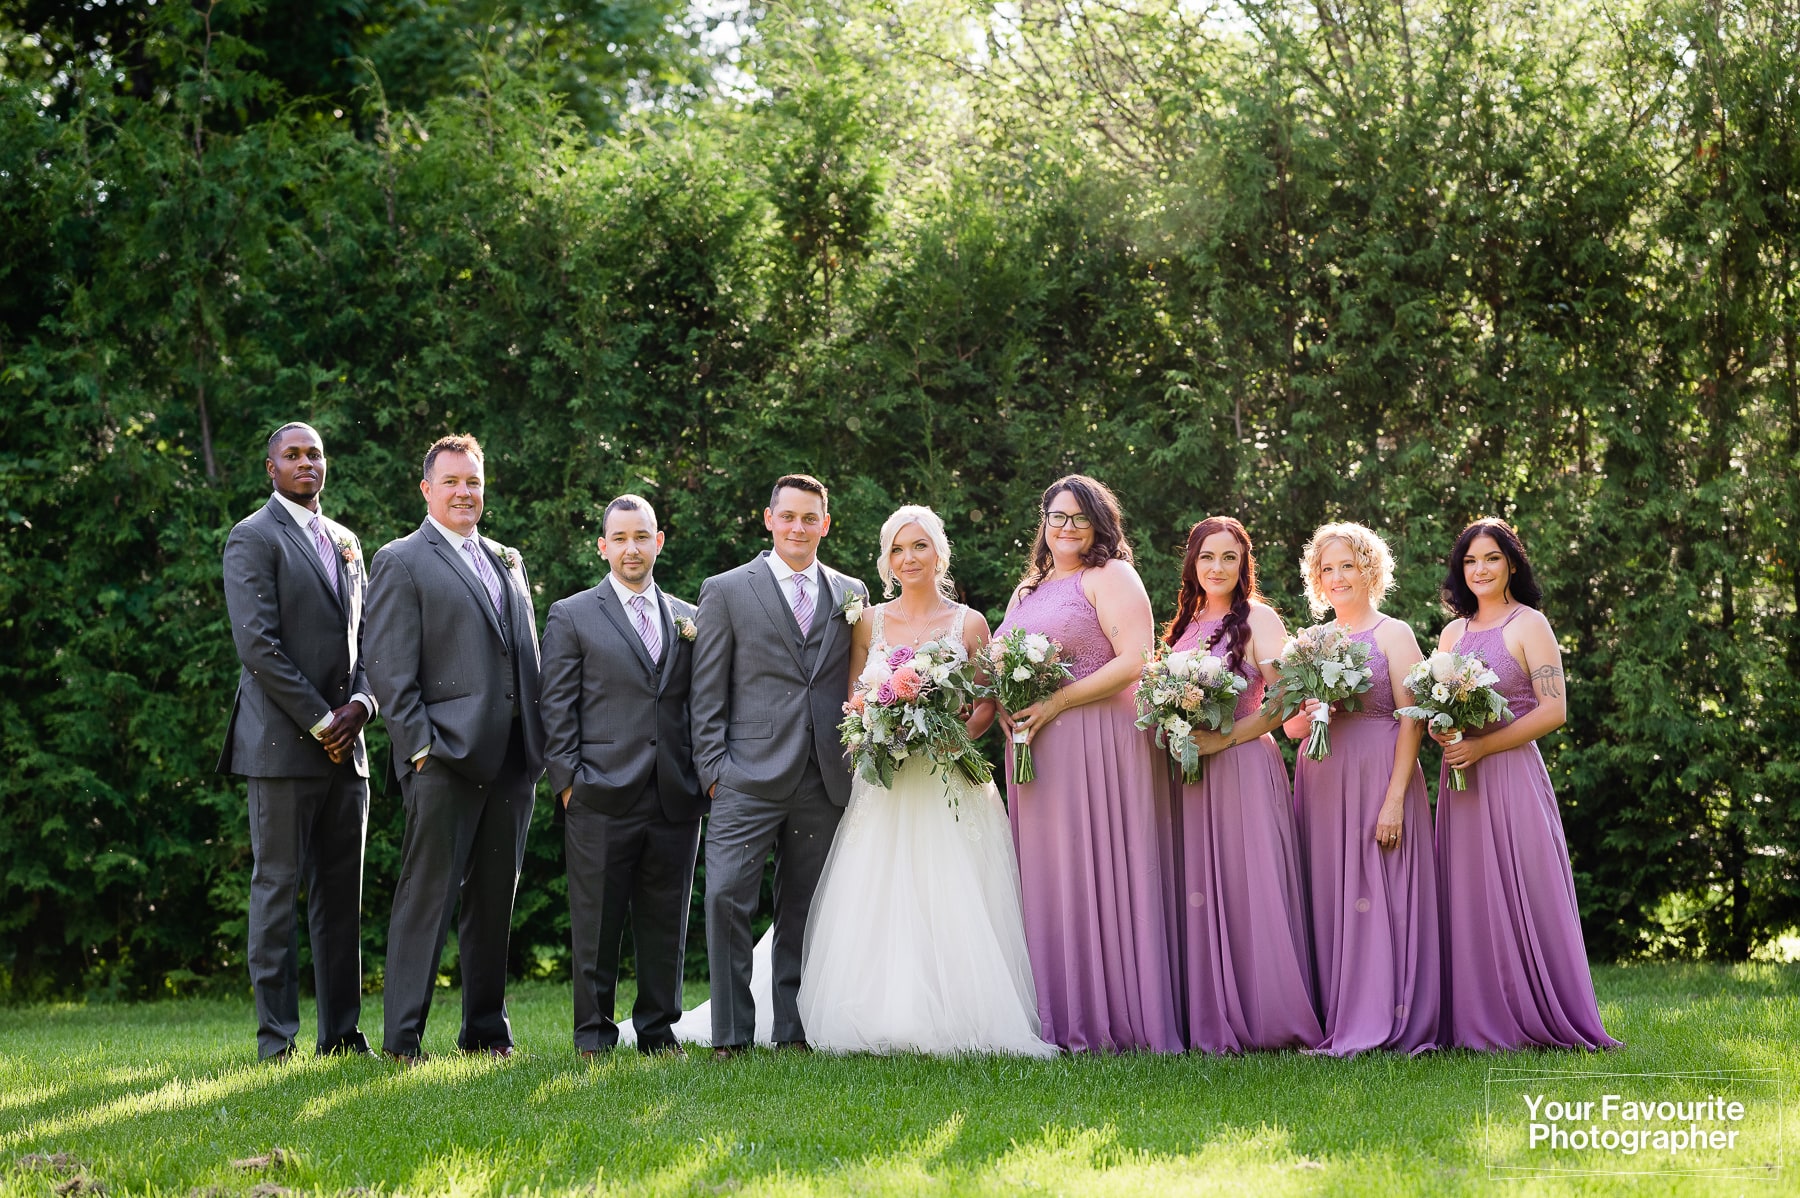 Posed photo of wedding party outdoors in nature